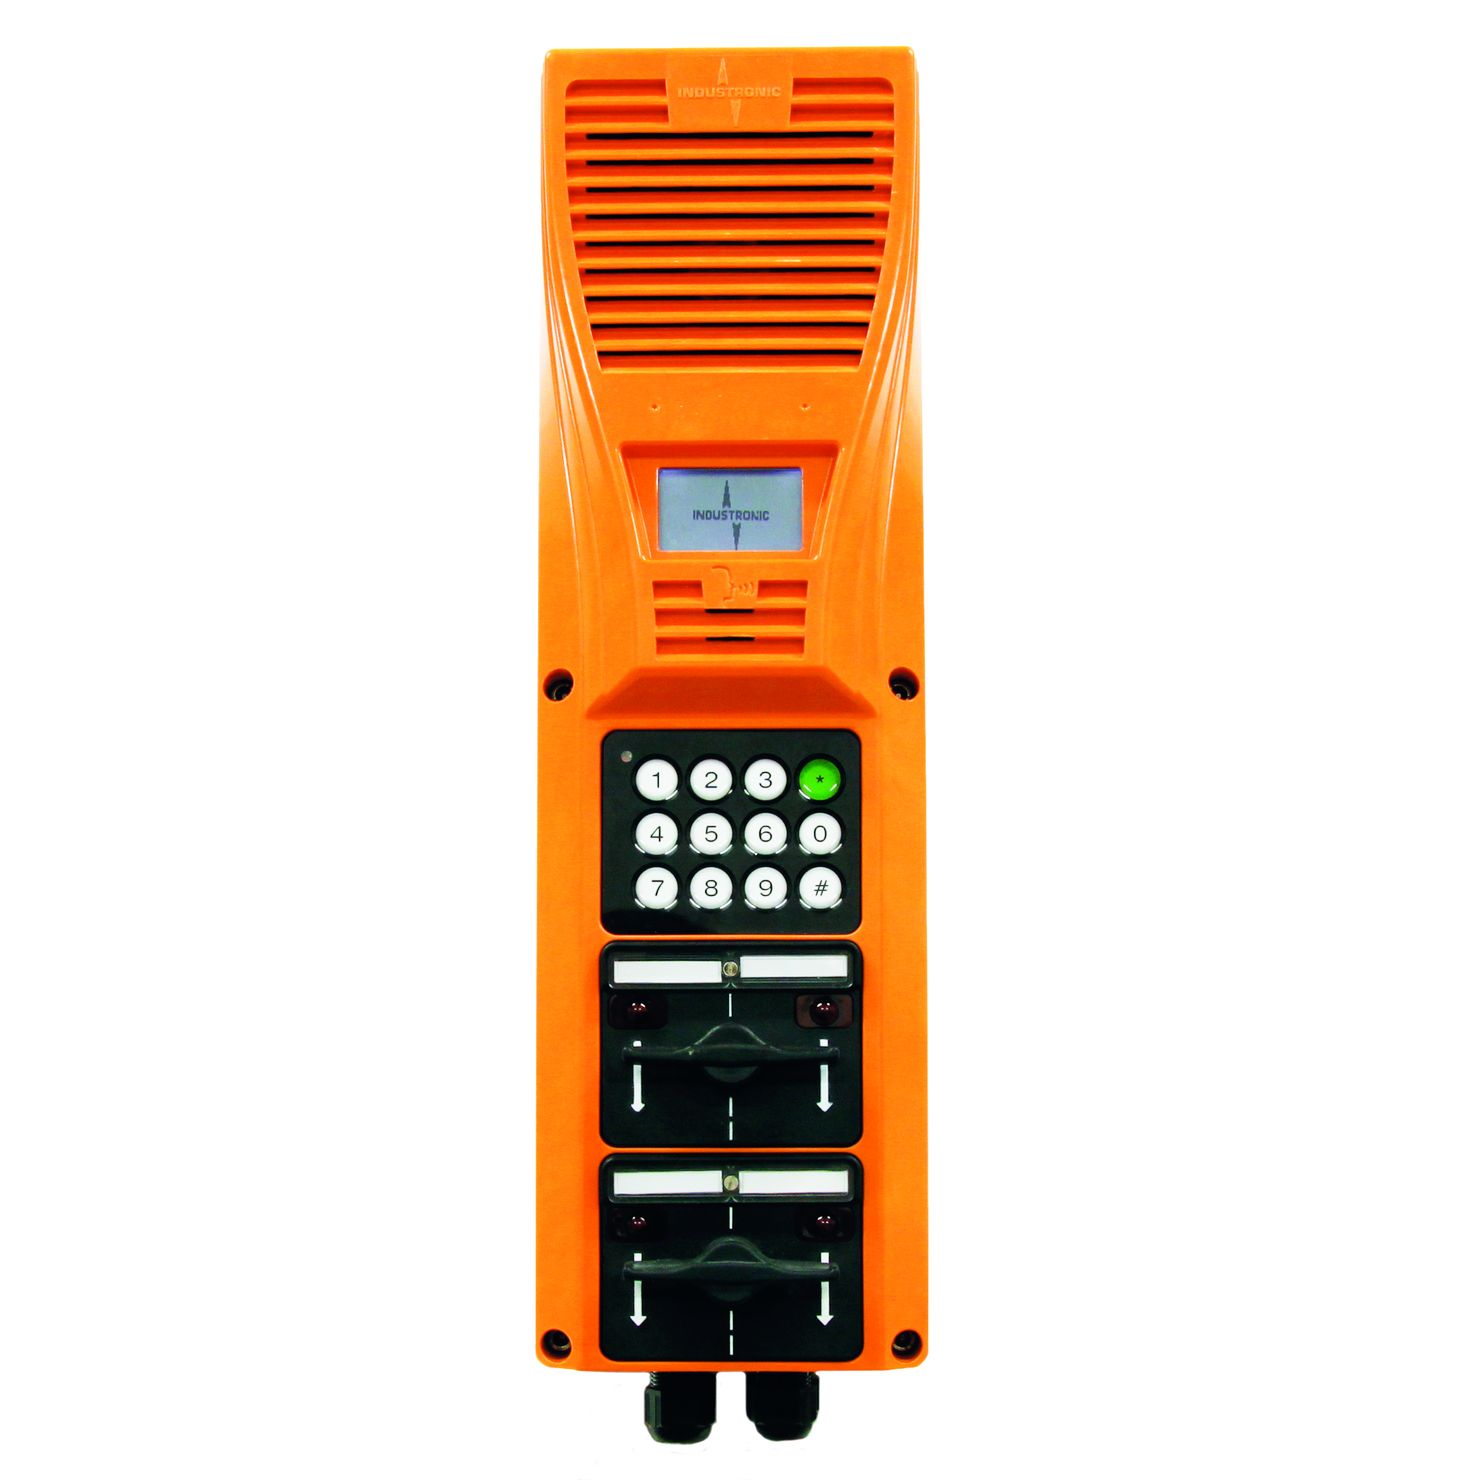 The weather-proof IP outdoor (harsh environment) intercom stations of the NRO 012/D series with integrated dial keypad are part of the INTRON-D plus communication and public address system from INDUSTRONIC.